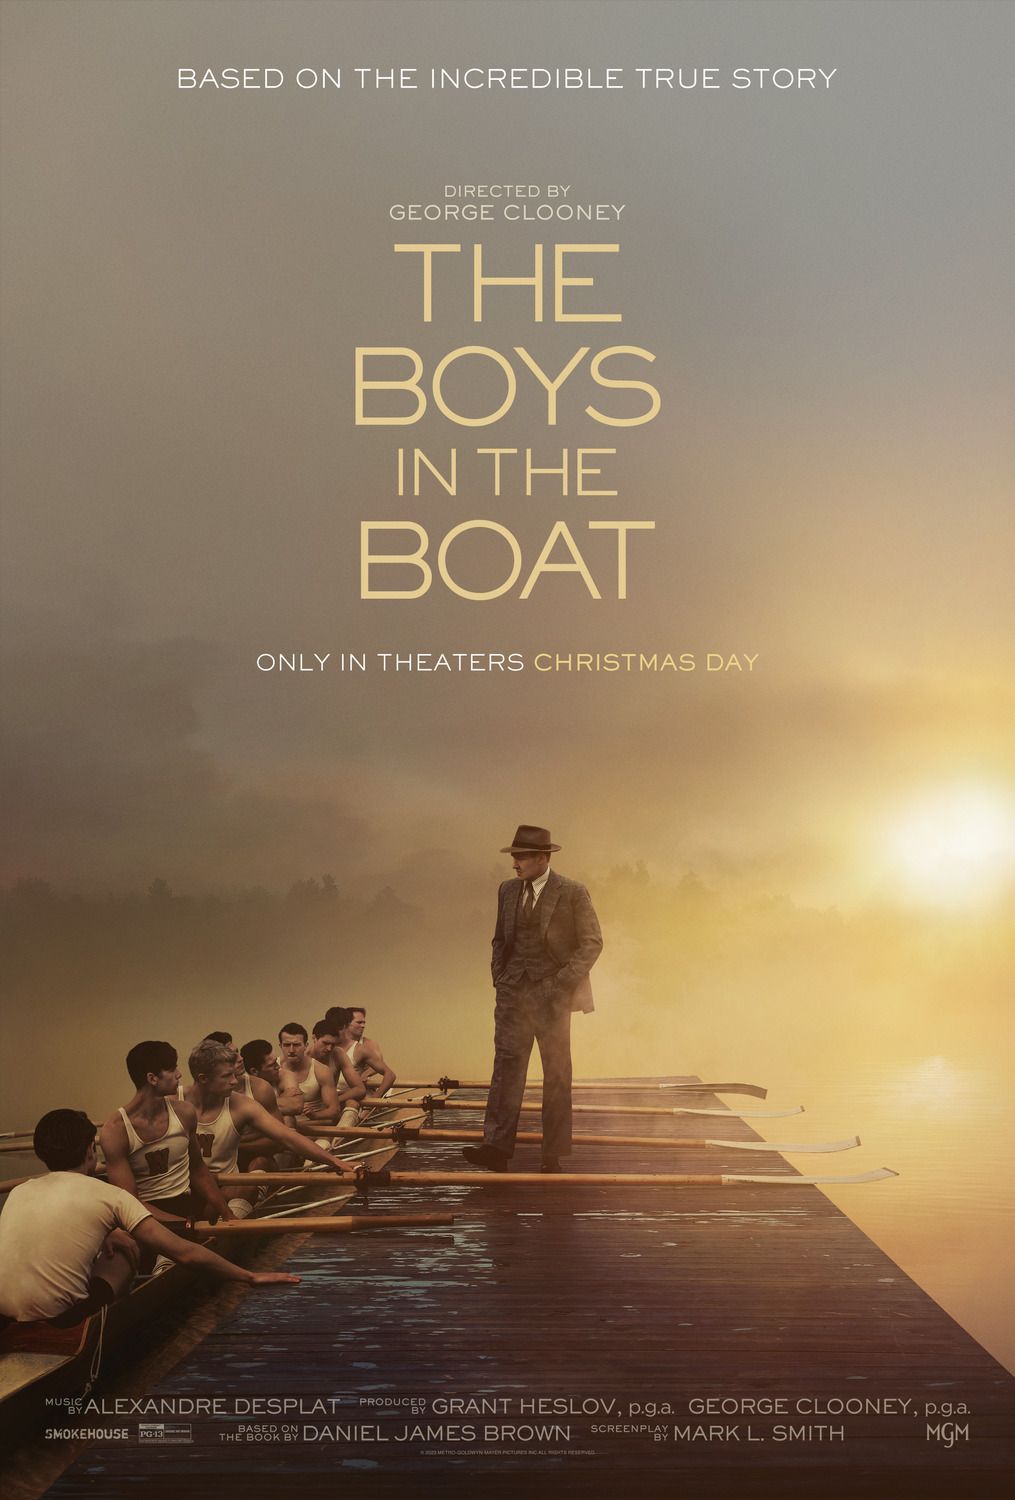 The Boys in the Boat review – George Clooney sports drama goes for  patriotic boosterism, Movies